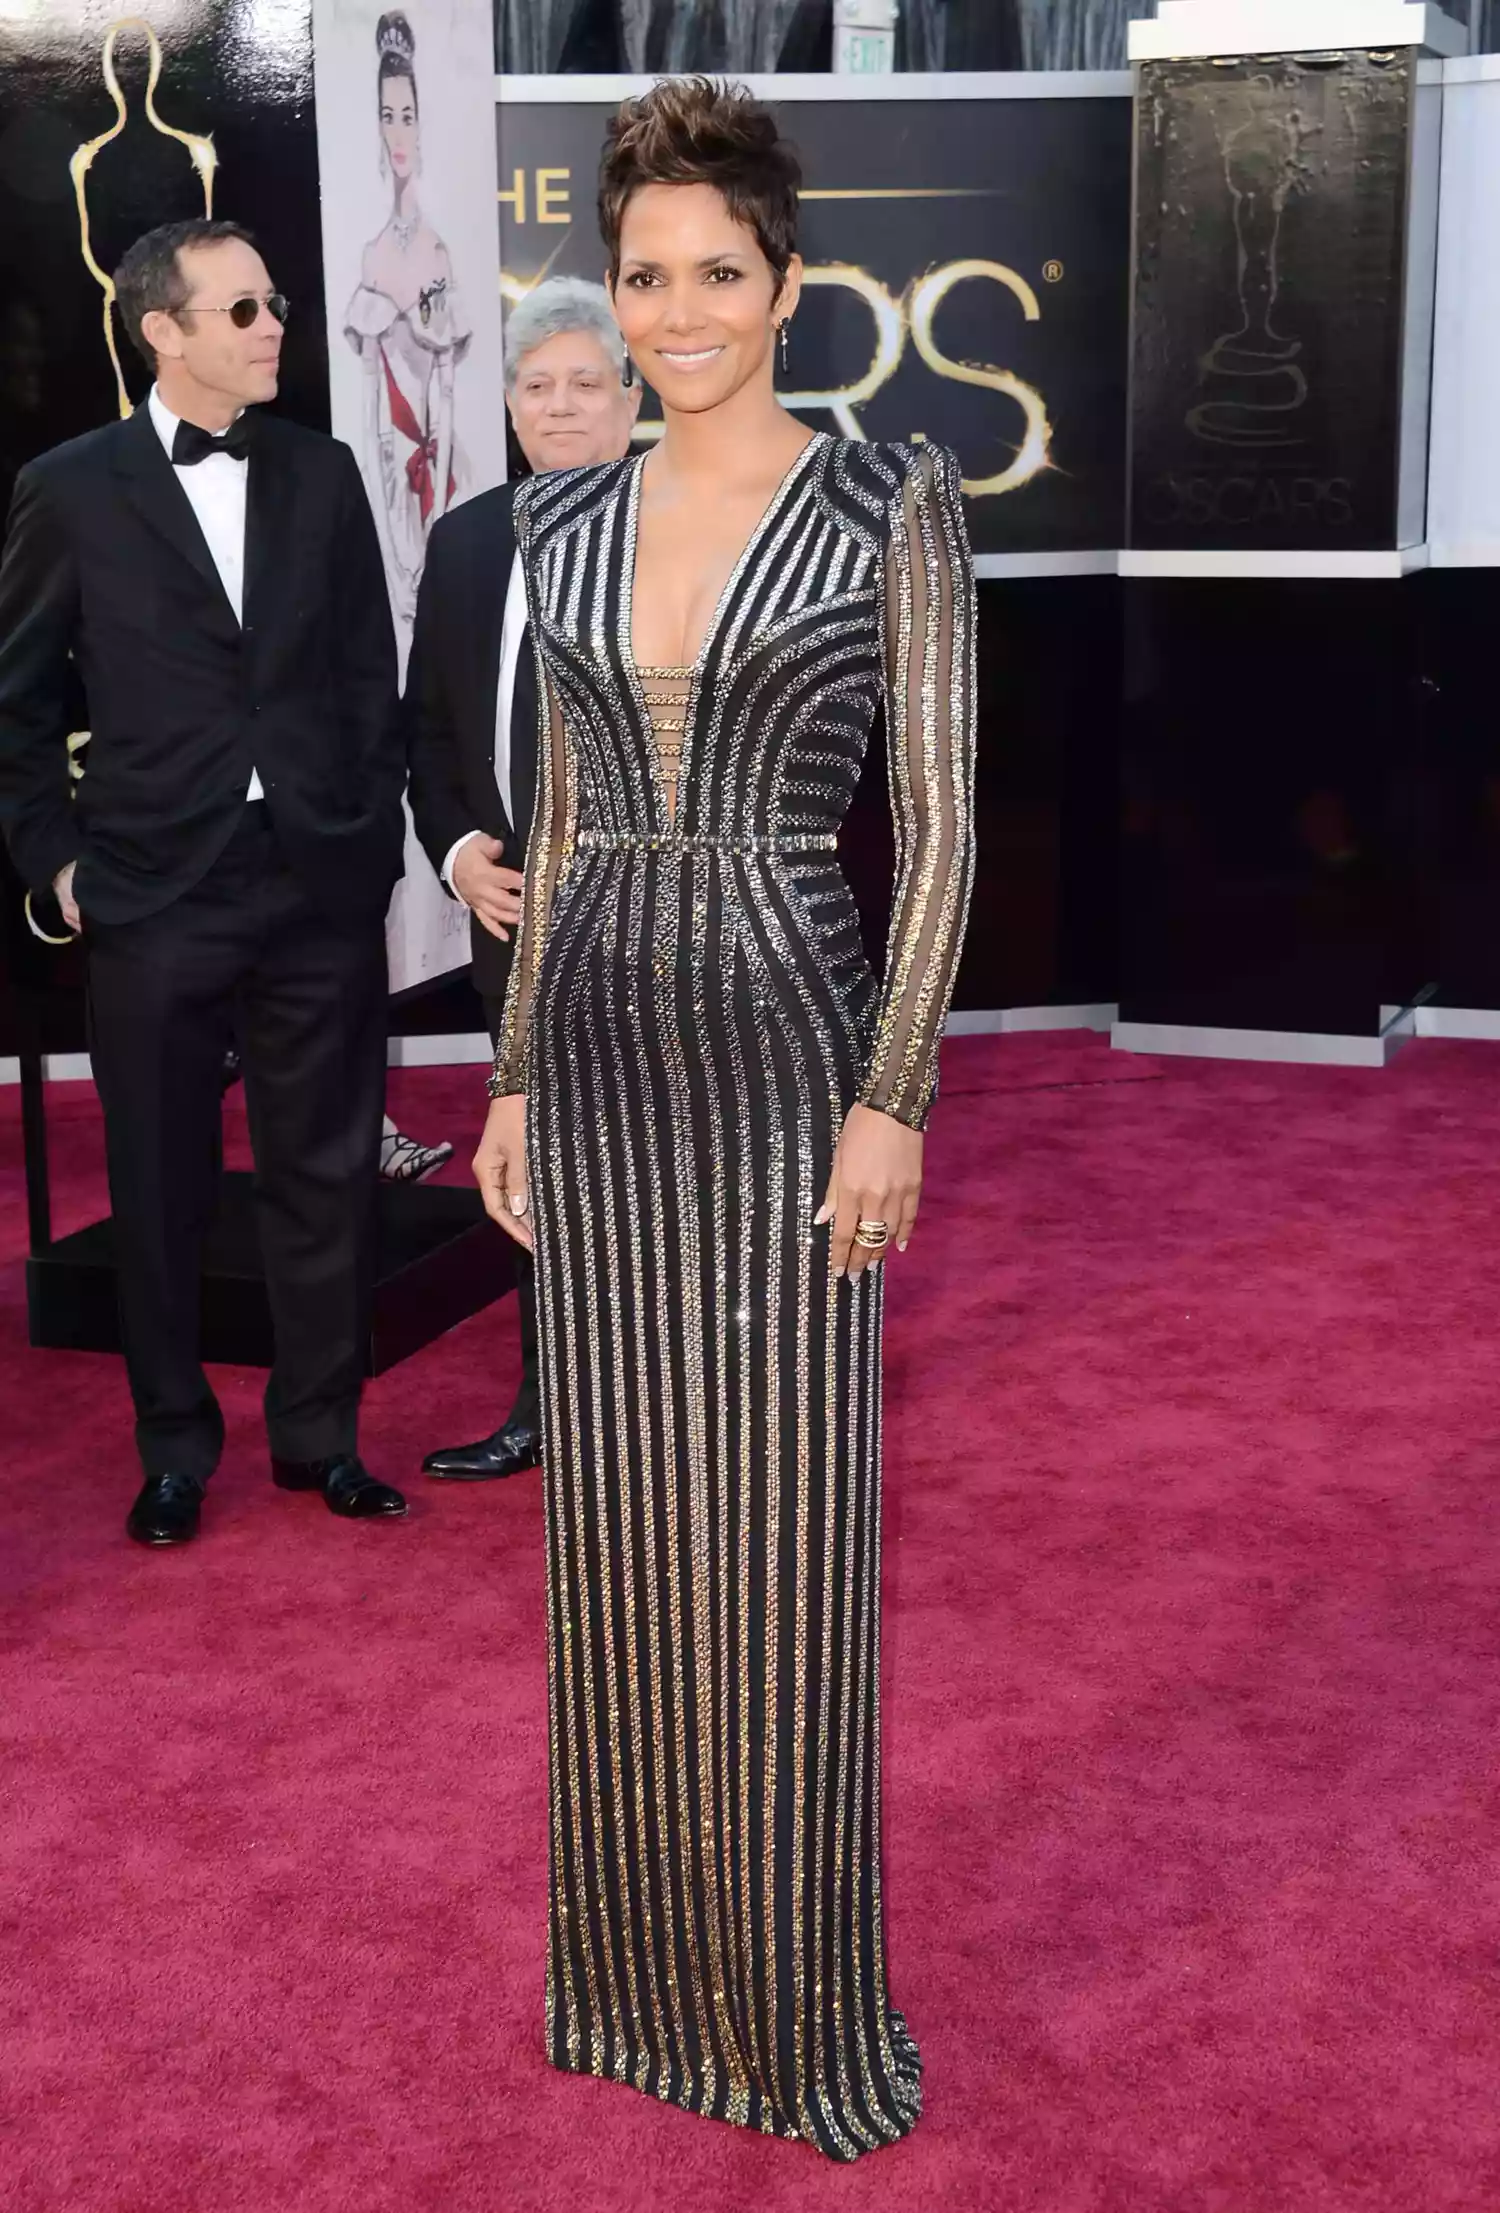 Halle Berry at the 2013 Oscars.